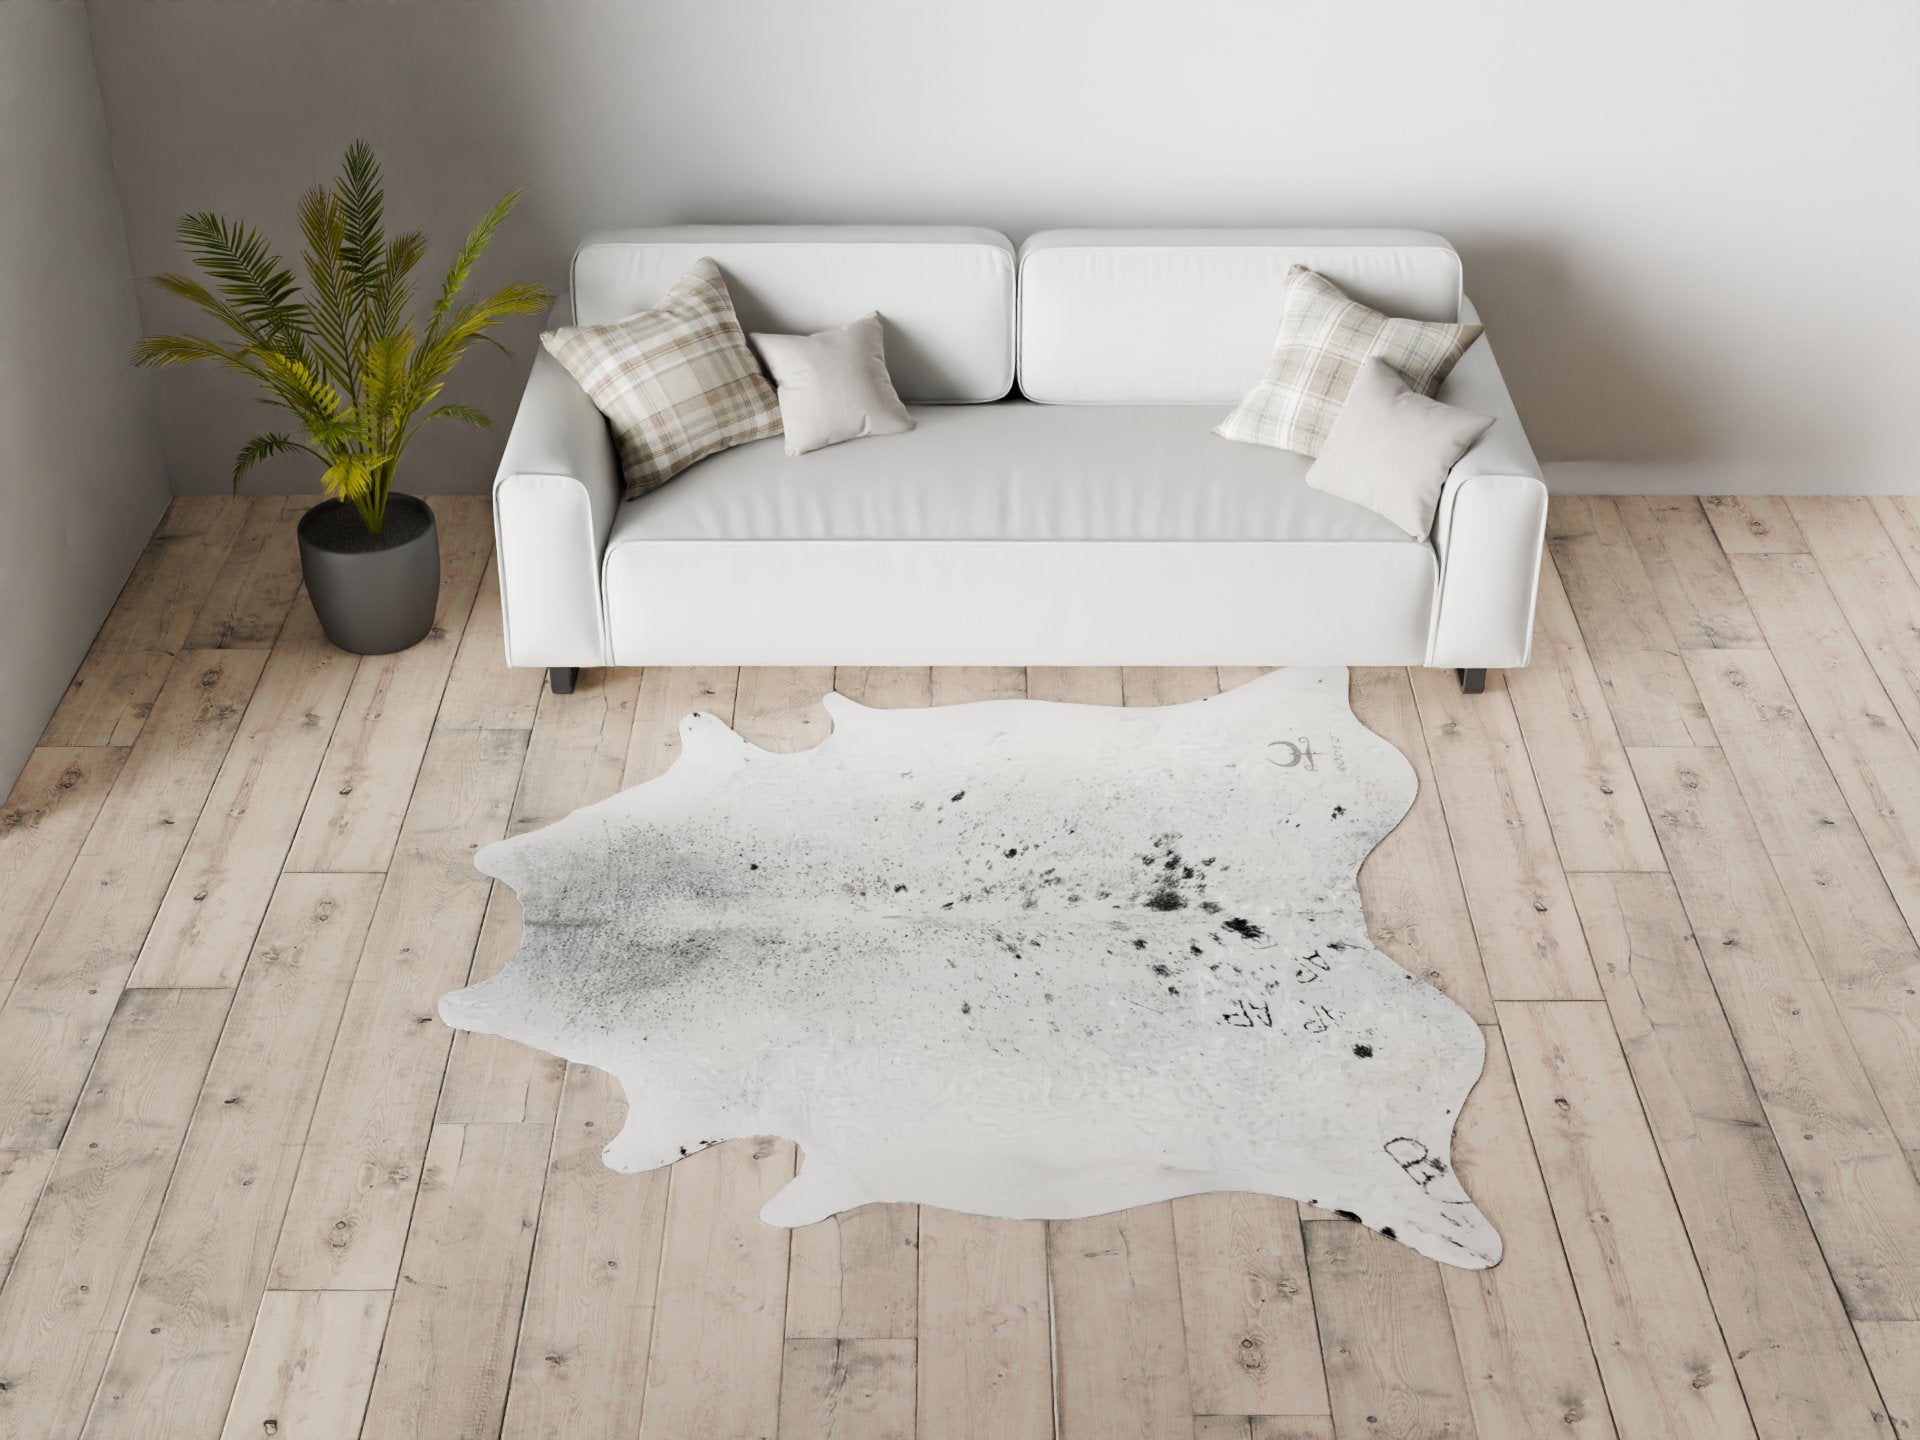 Salt and Pepper Cowhide Rug Size 6x7 ft---4664 - Rodeo Cowhide Rugs